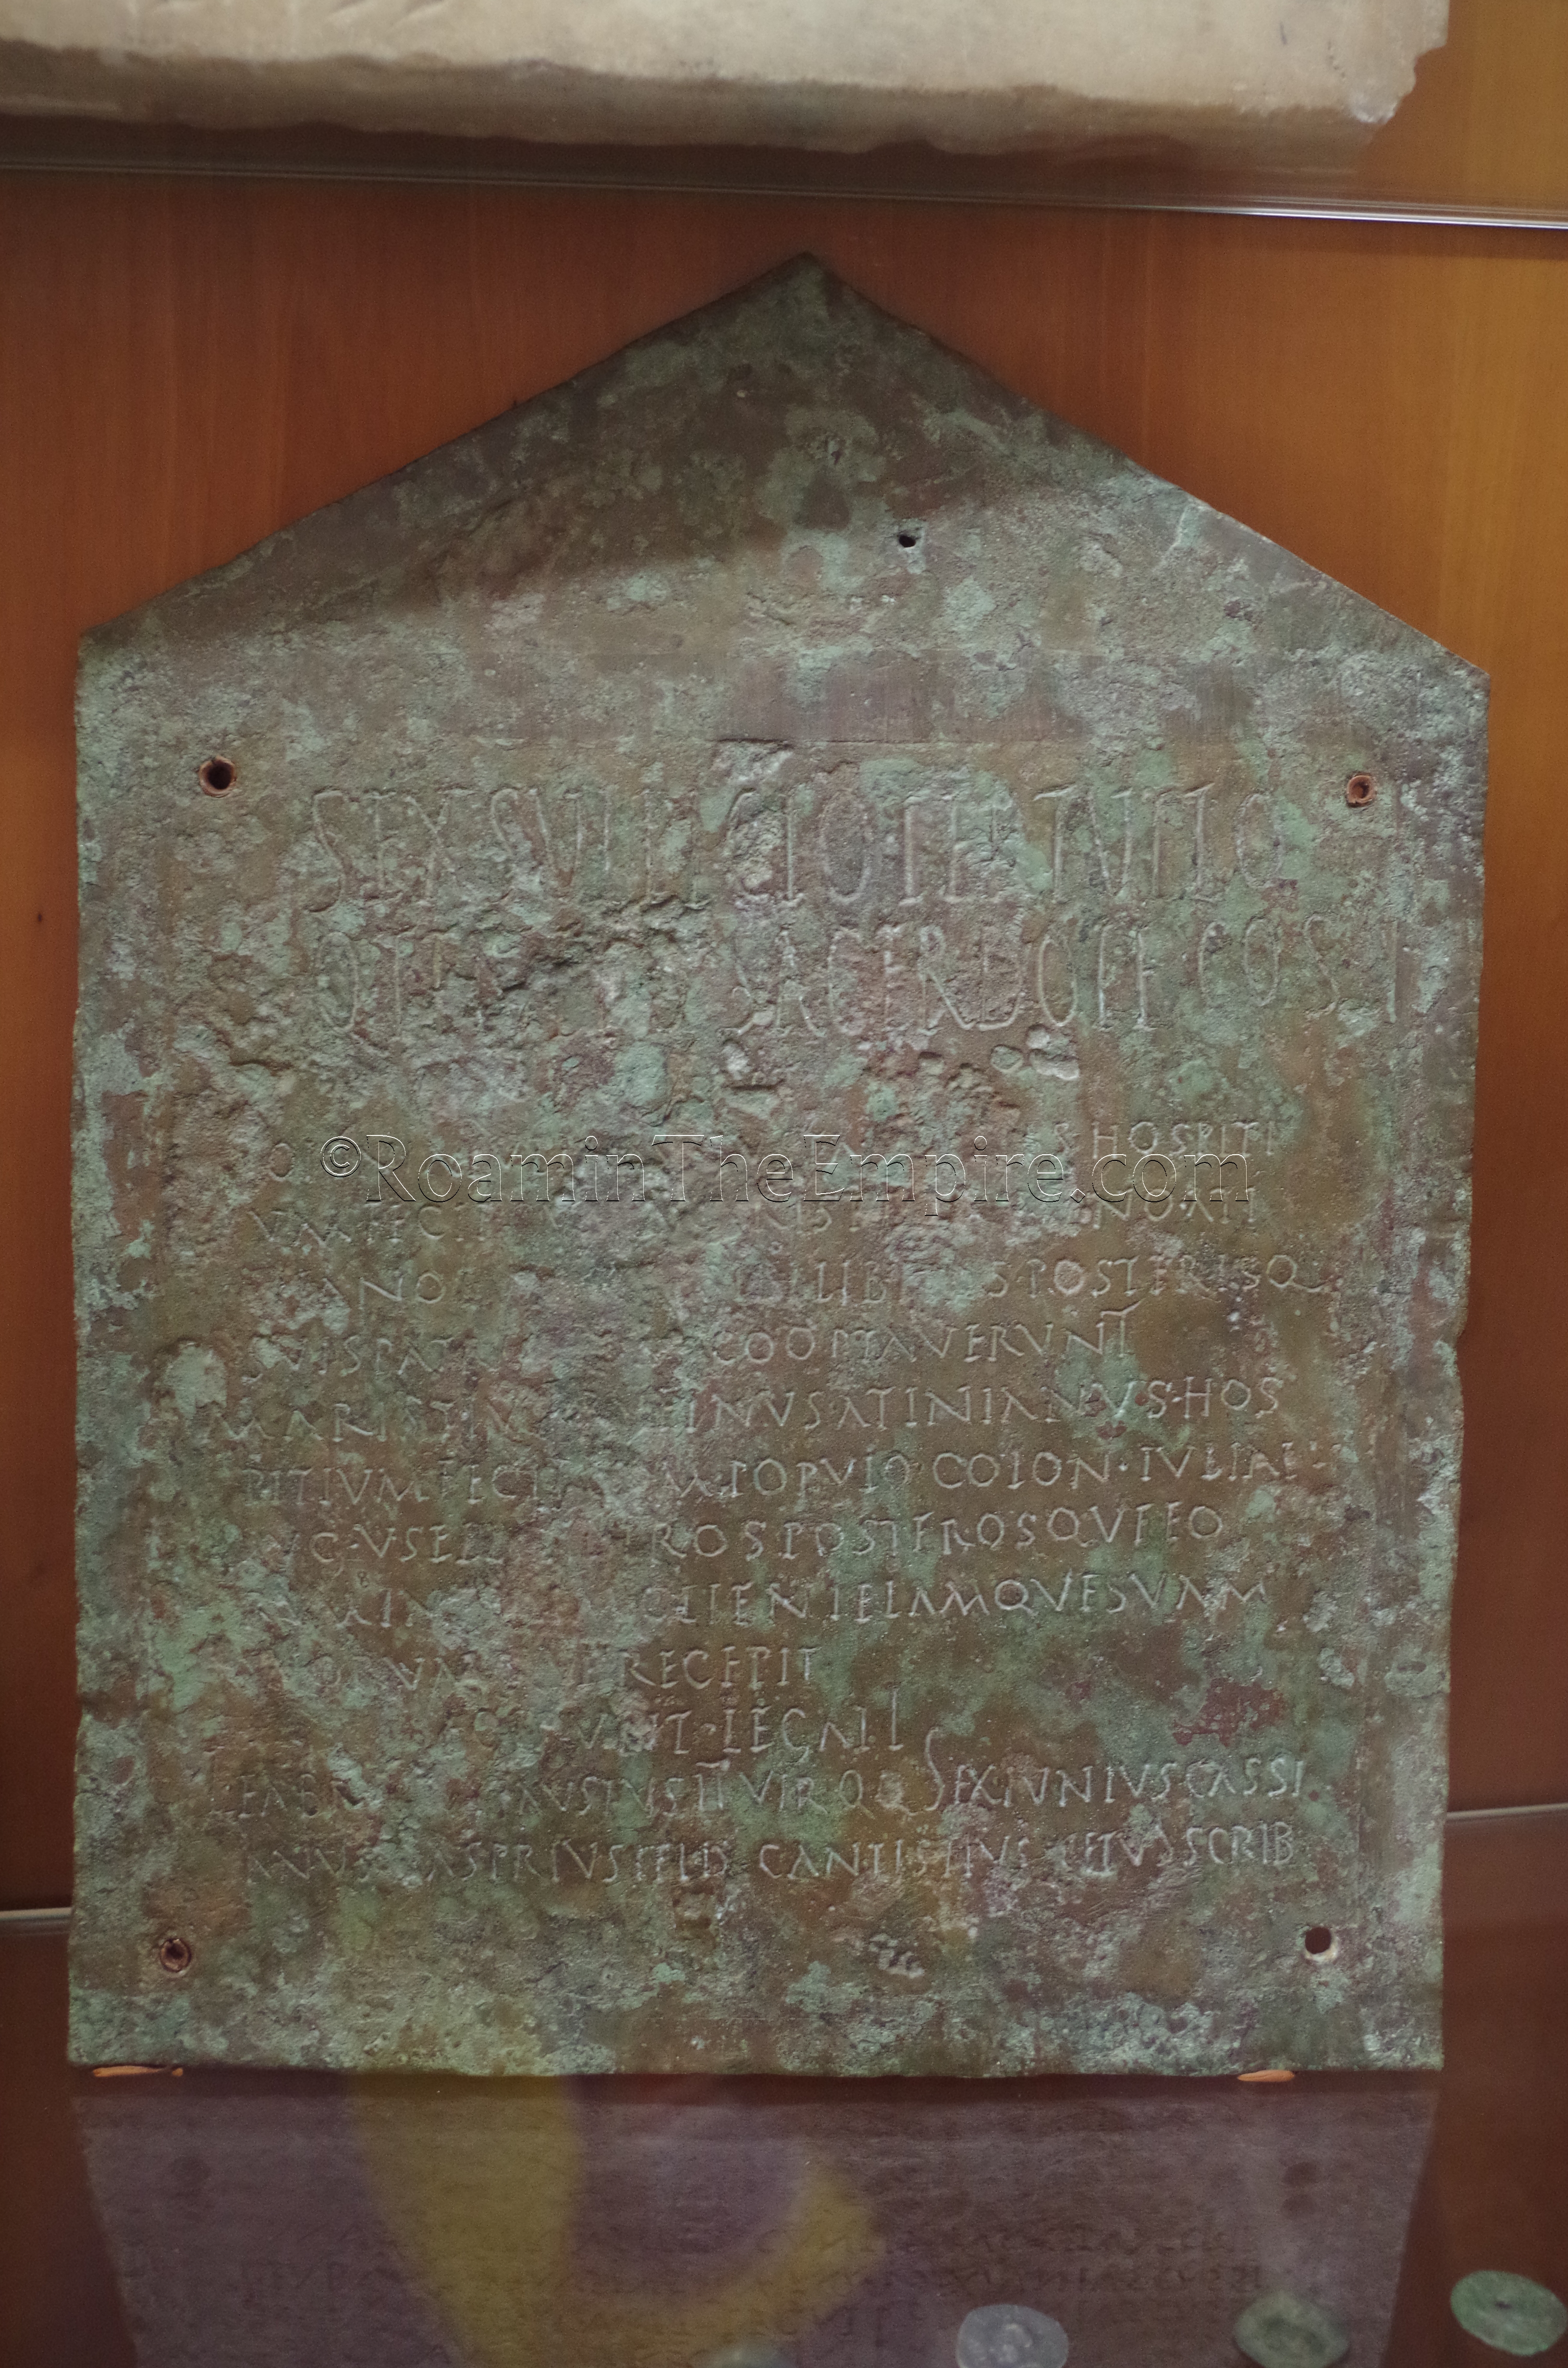 Bronze plaque noting a pact of hospitality between Colonia Augusta Julia Uselis and Marcus Aristius Balbinus Atinianus in 158 CE. Displayed in the Museo Archeologico e Storico Artistico 'Antiquarium Arborense.